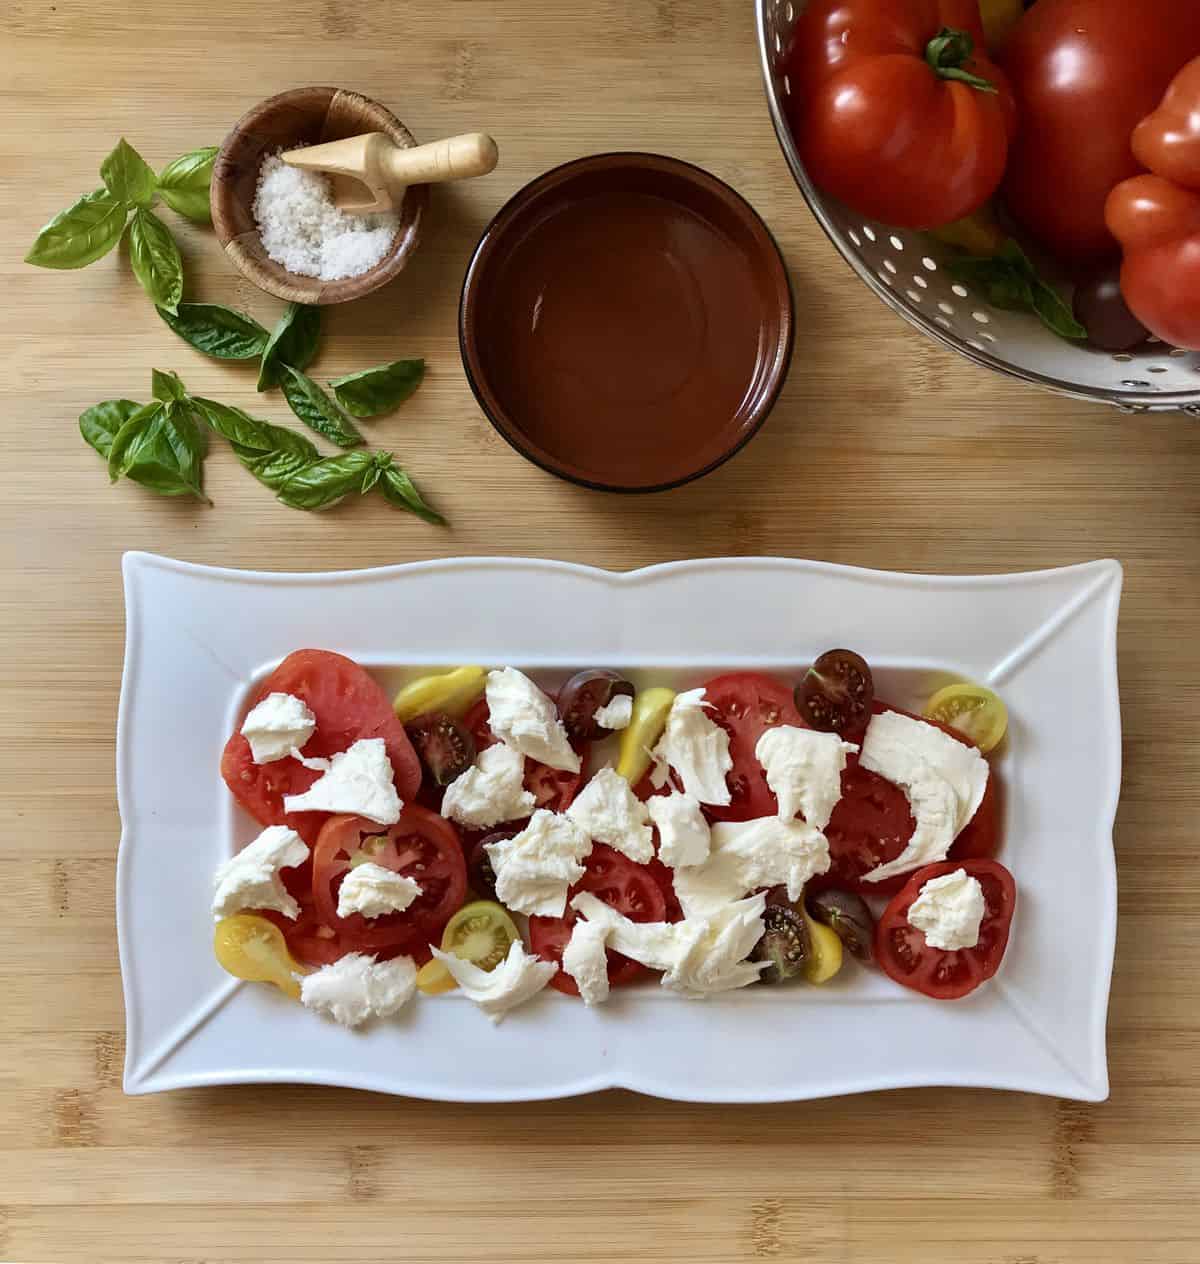 Torn pieces of mozzarella cheese scattered atop sliced heirloom tomatoes in a white serving platter.